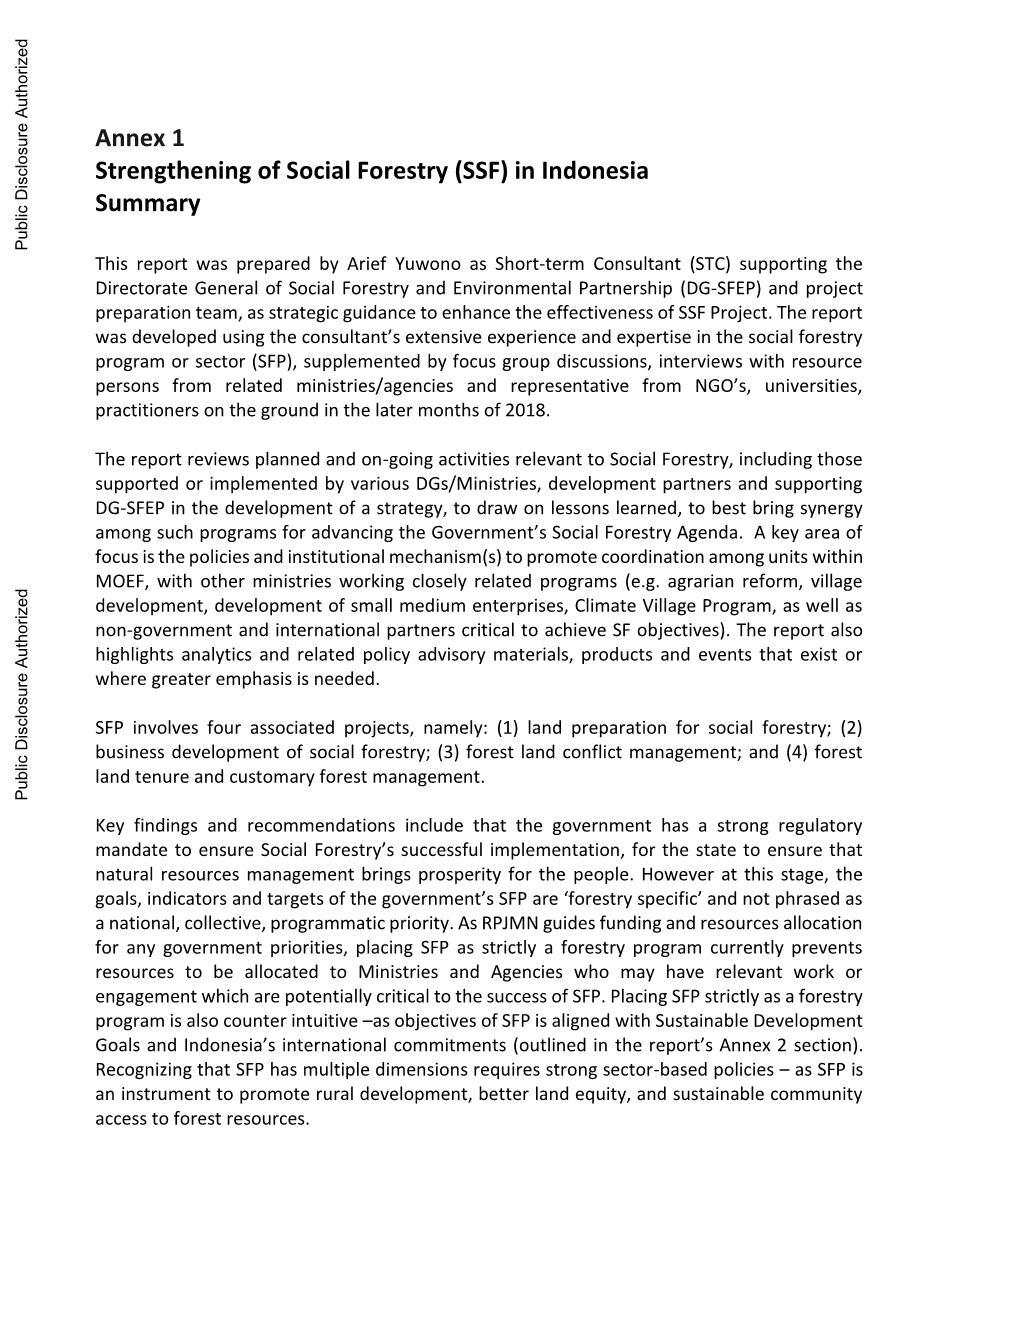 Annex 1 Strengthening of Social Forestry (SSF) in Indonesia Summary